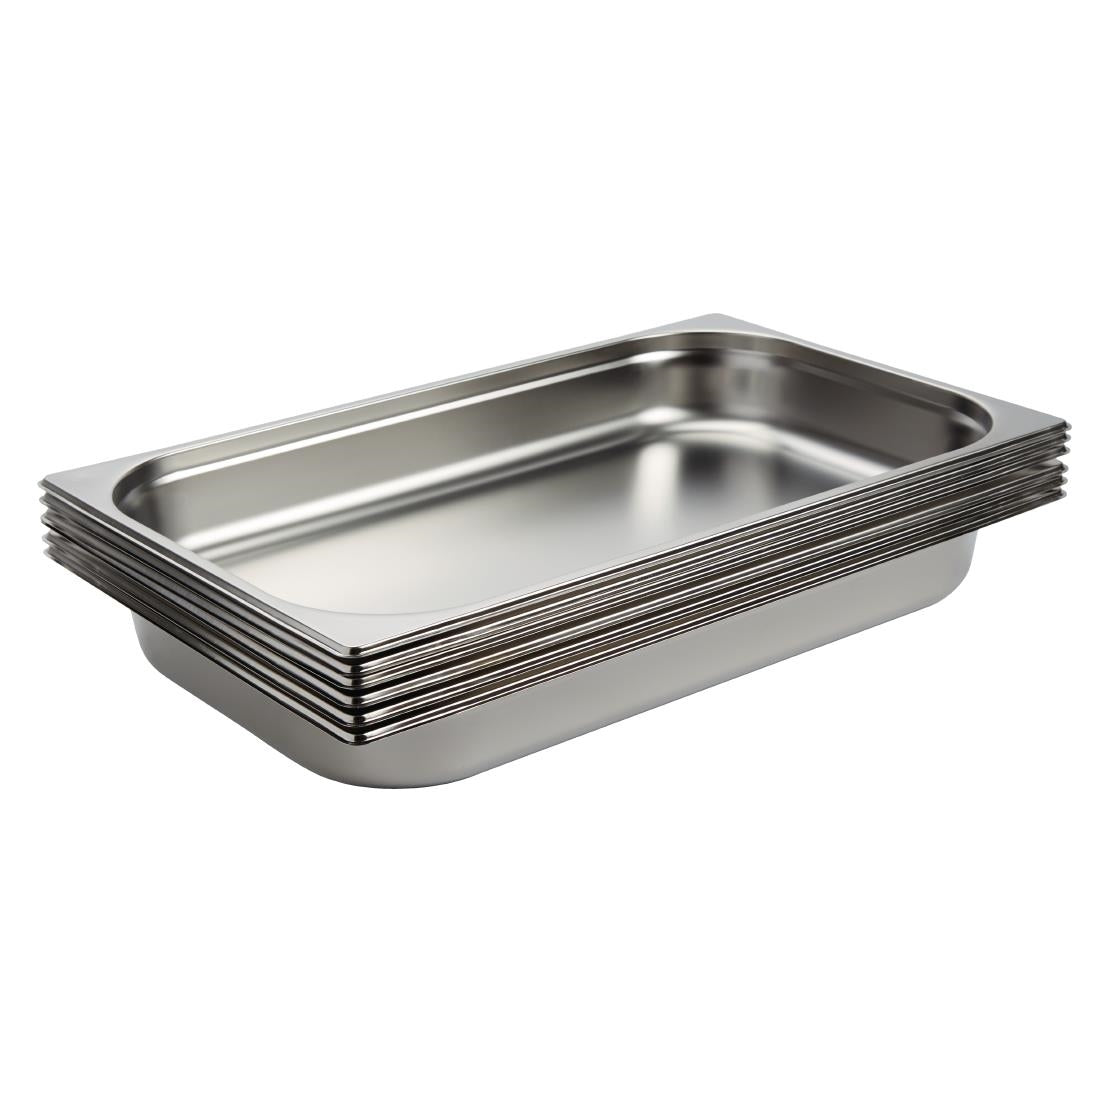 Vogue Stainless Steel 1/1 Gastronorm Pan 65mm